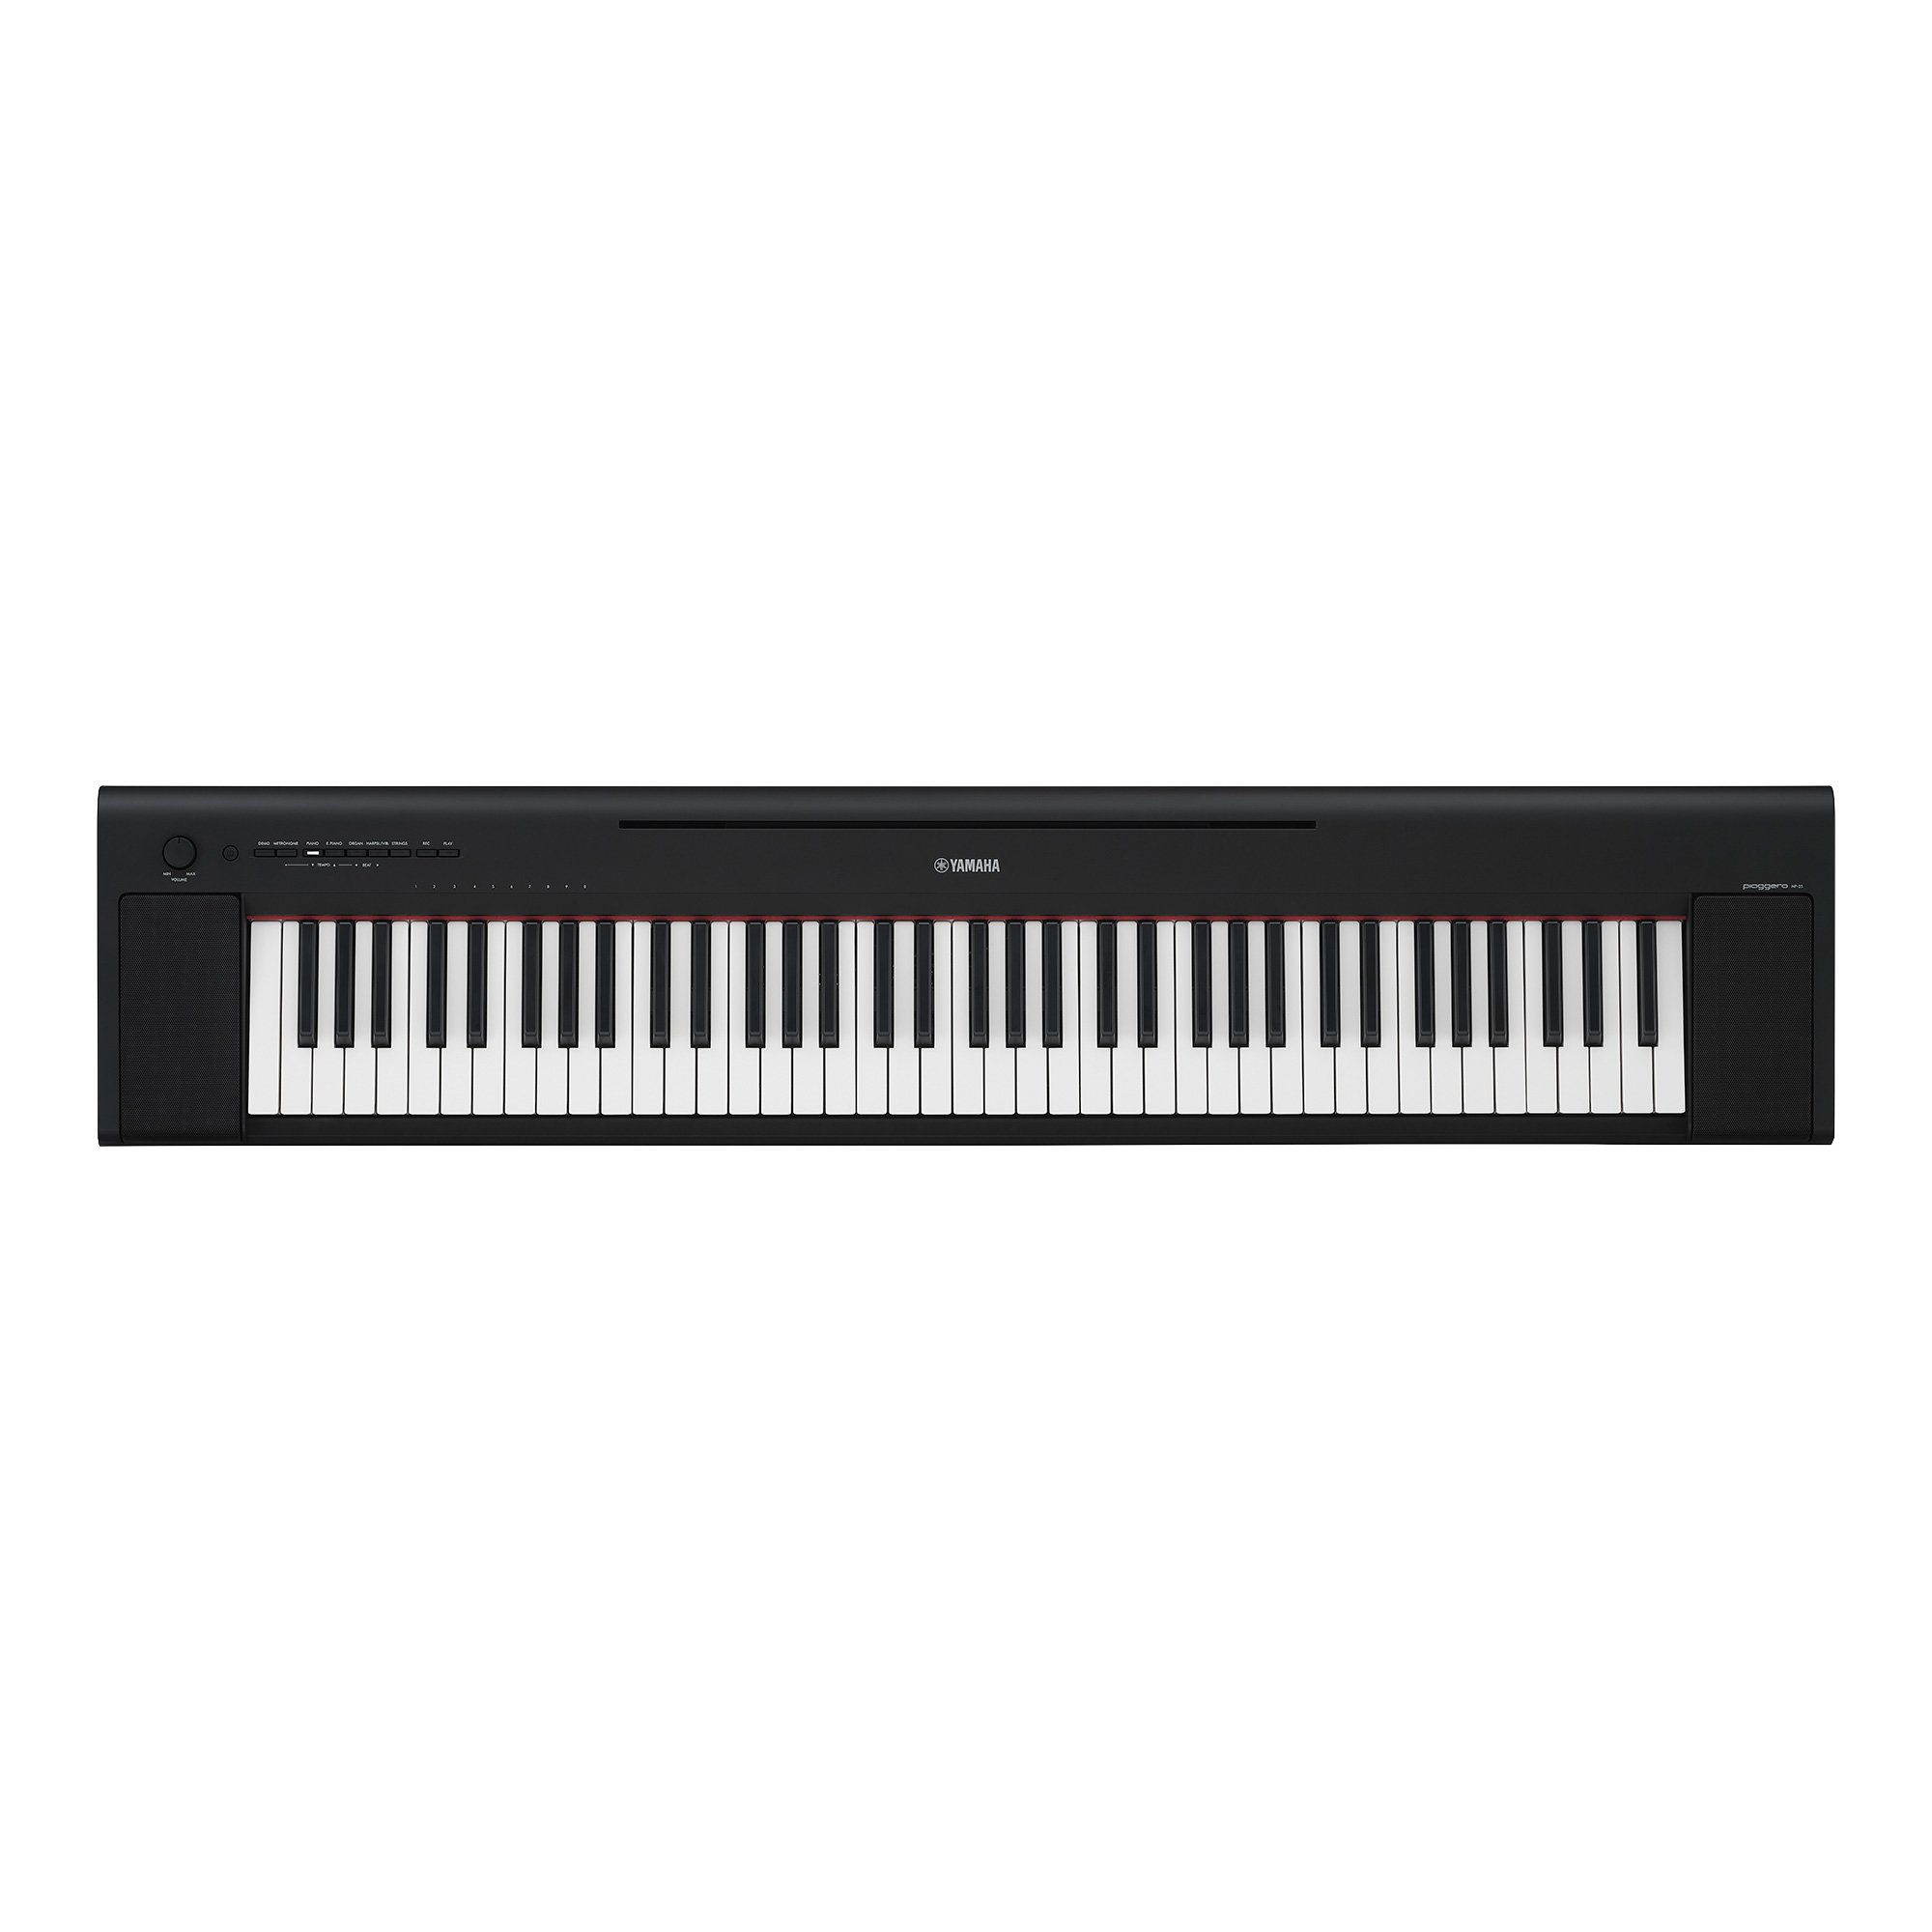 Piaggero - Keyboard Instruments - Musical Instruments - Products 